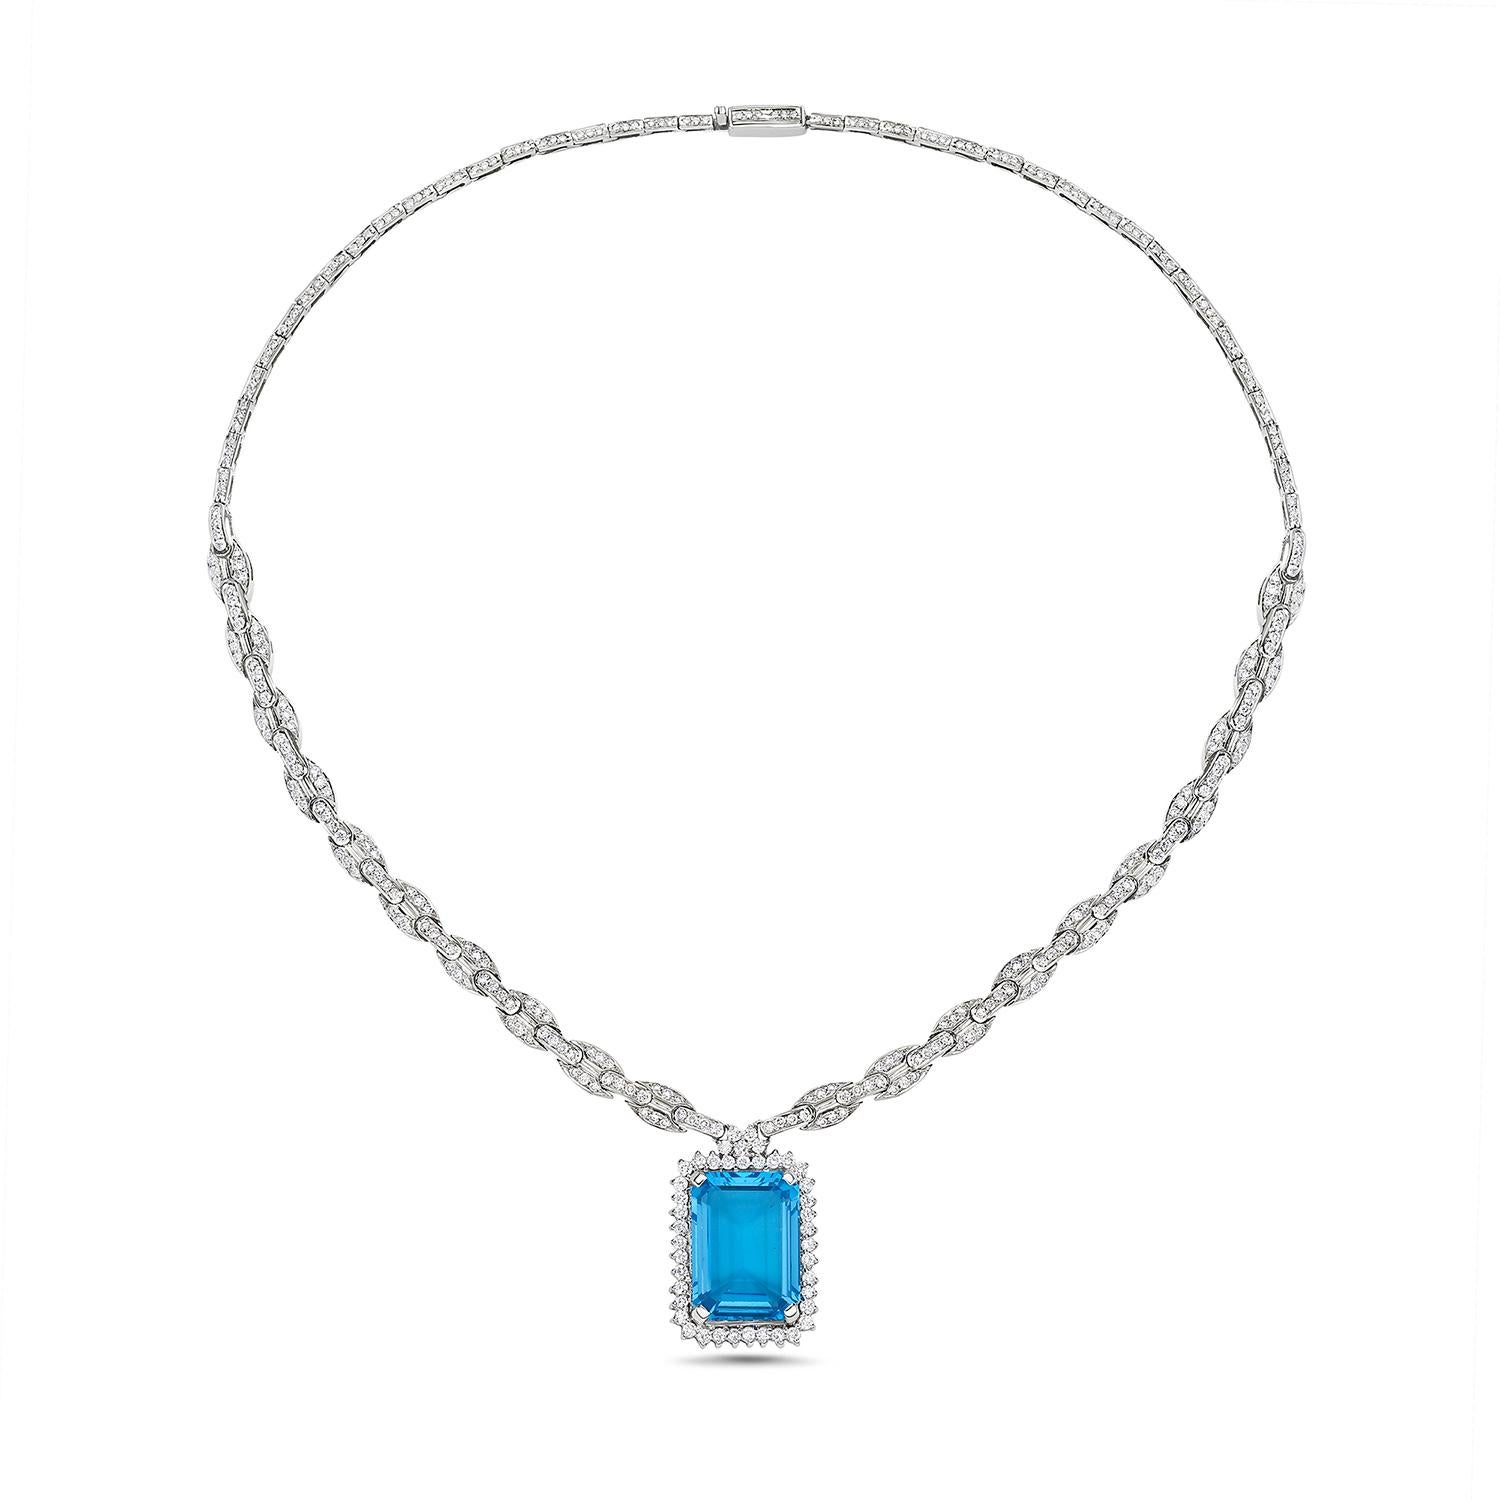 Octogen Cut Blue Topaz Necklace Linked with Pave Diamonds Made in 18k White Gold In New Condition For Sale In New York, NY